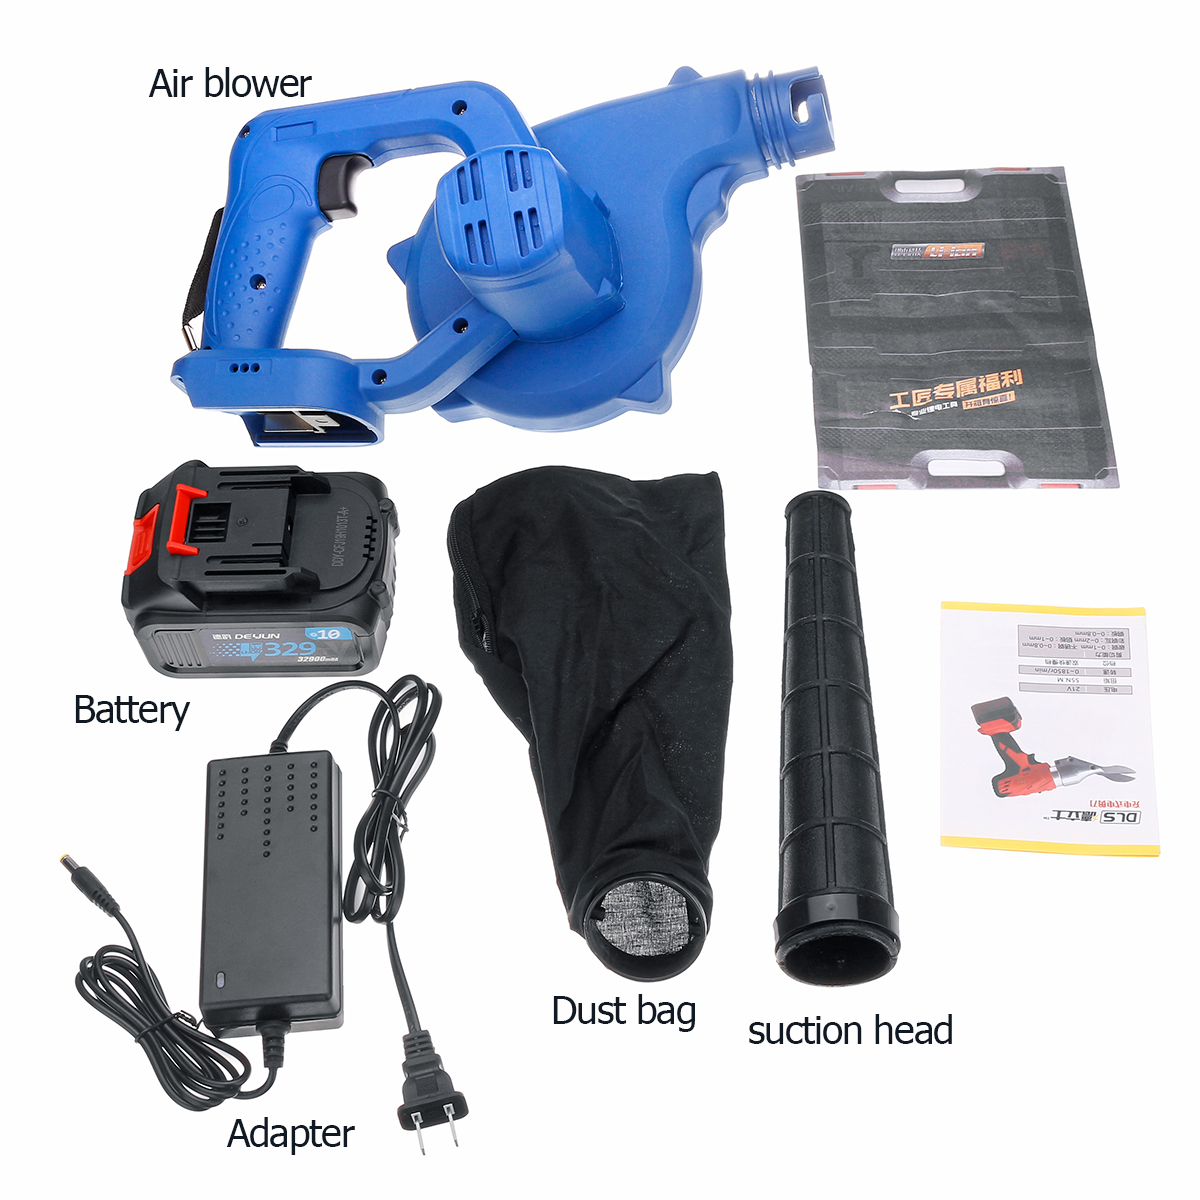 Cordless-Electric-Air-Blower-Handheld-Blowing-Rechargeable-Cleaning-Dust-Machine-1605626-9